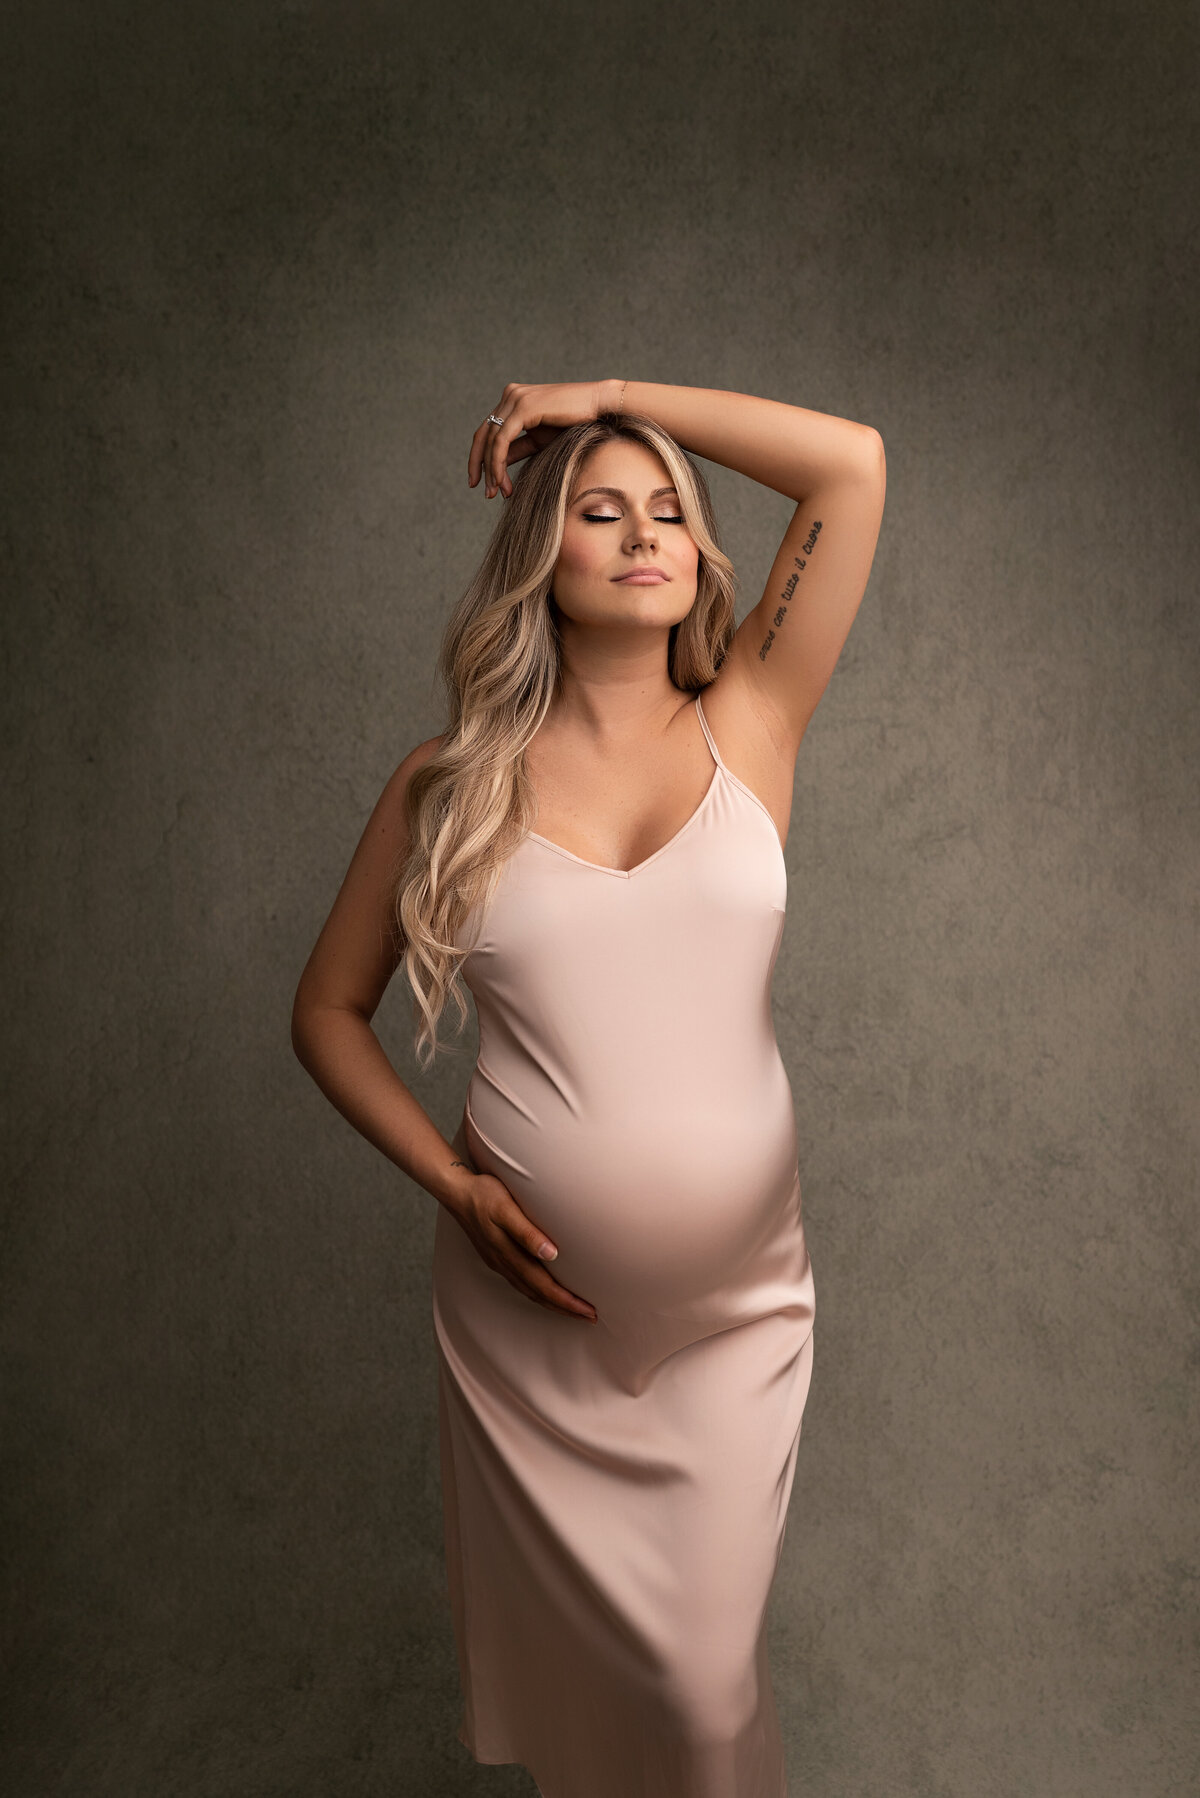 Philadelphia Main Line's best maternity photographer Katie Marshall captures expectant mom for a fine art maternity photoshoot. Woman in a long blush silky maternity slip is standing facing the camera. One hand rests to the side of her baby bump, the other arm is draped atop of her head. Her eyes are closed and chin tilted slightly up toward the light.